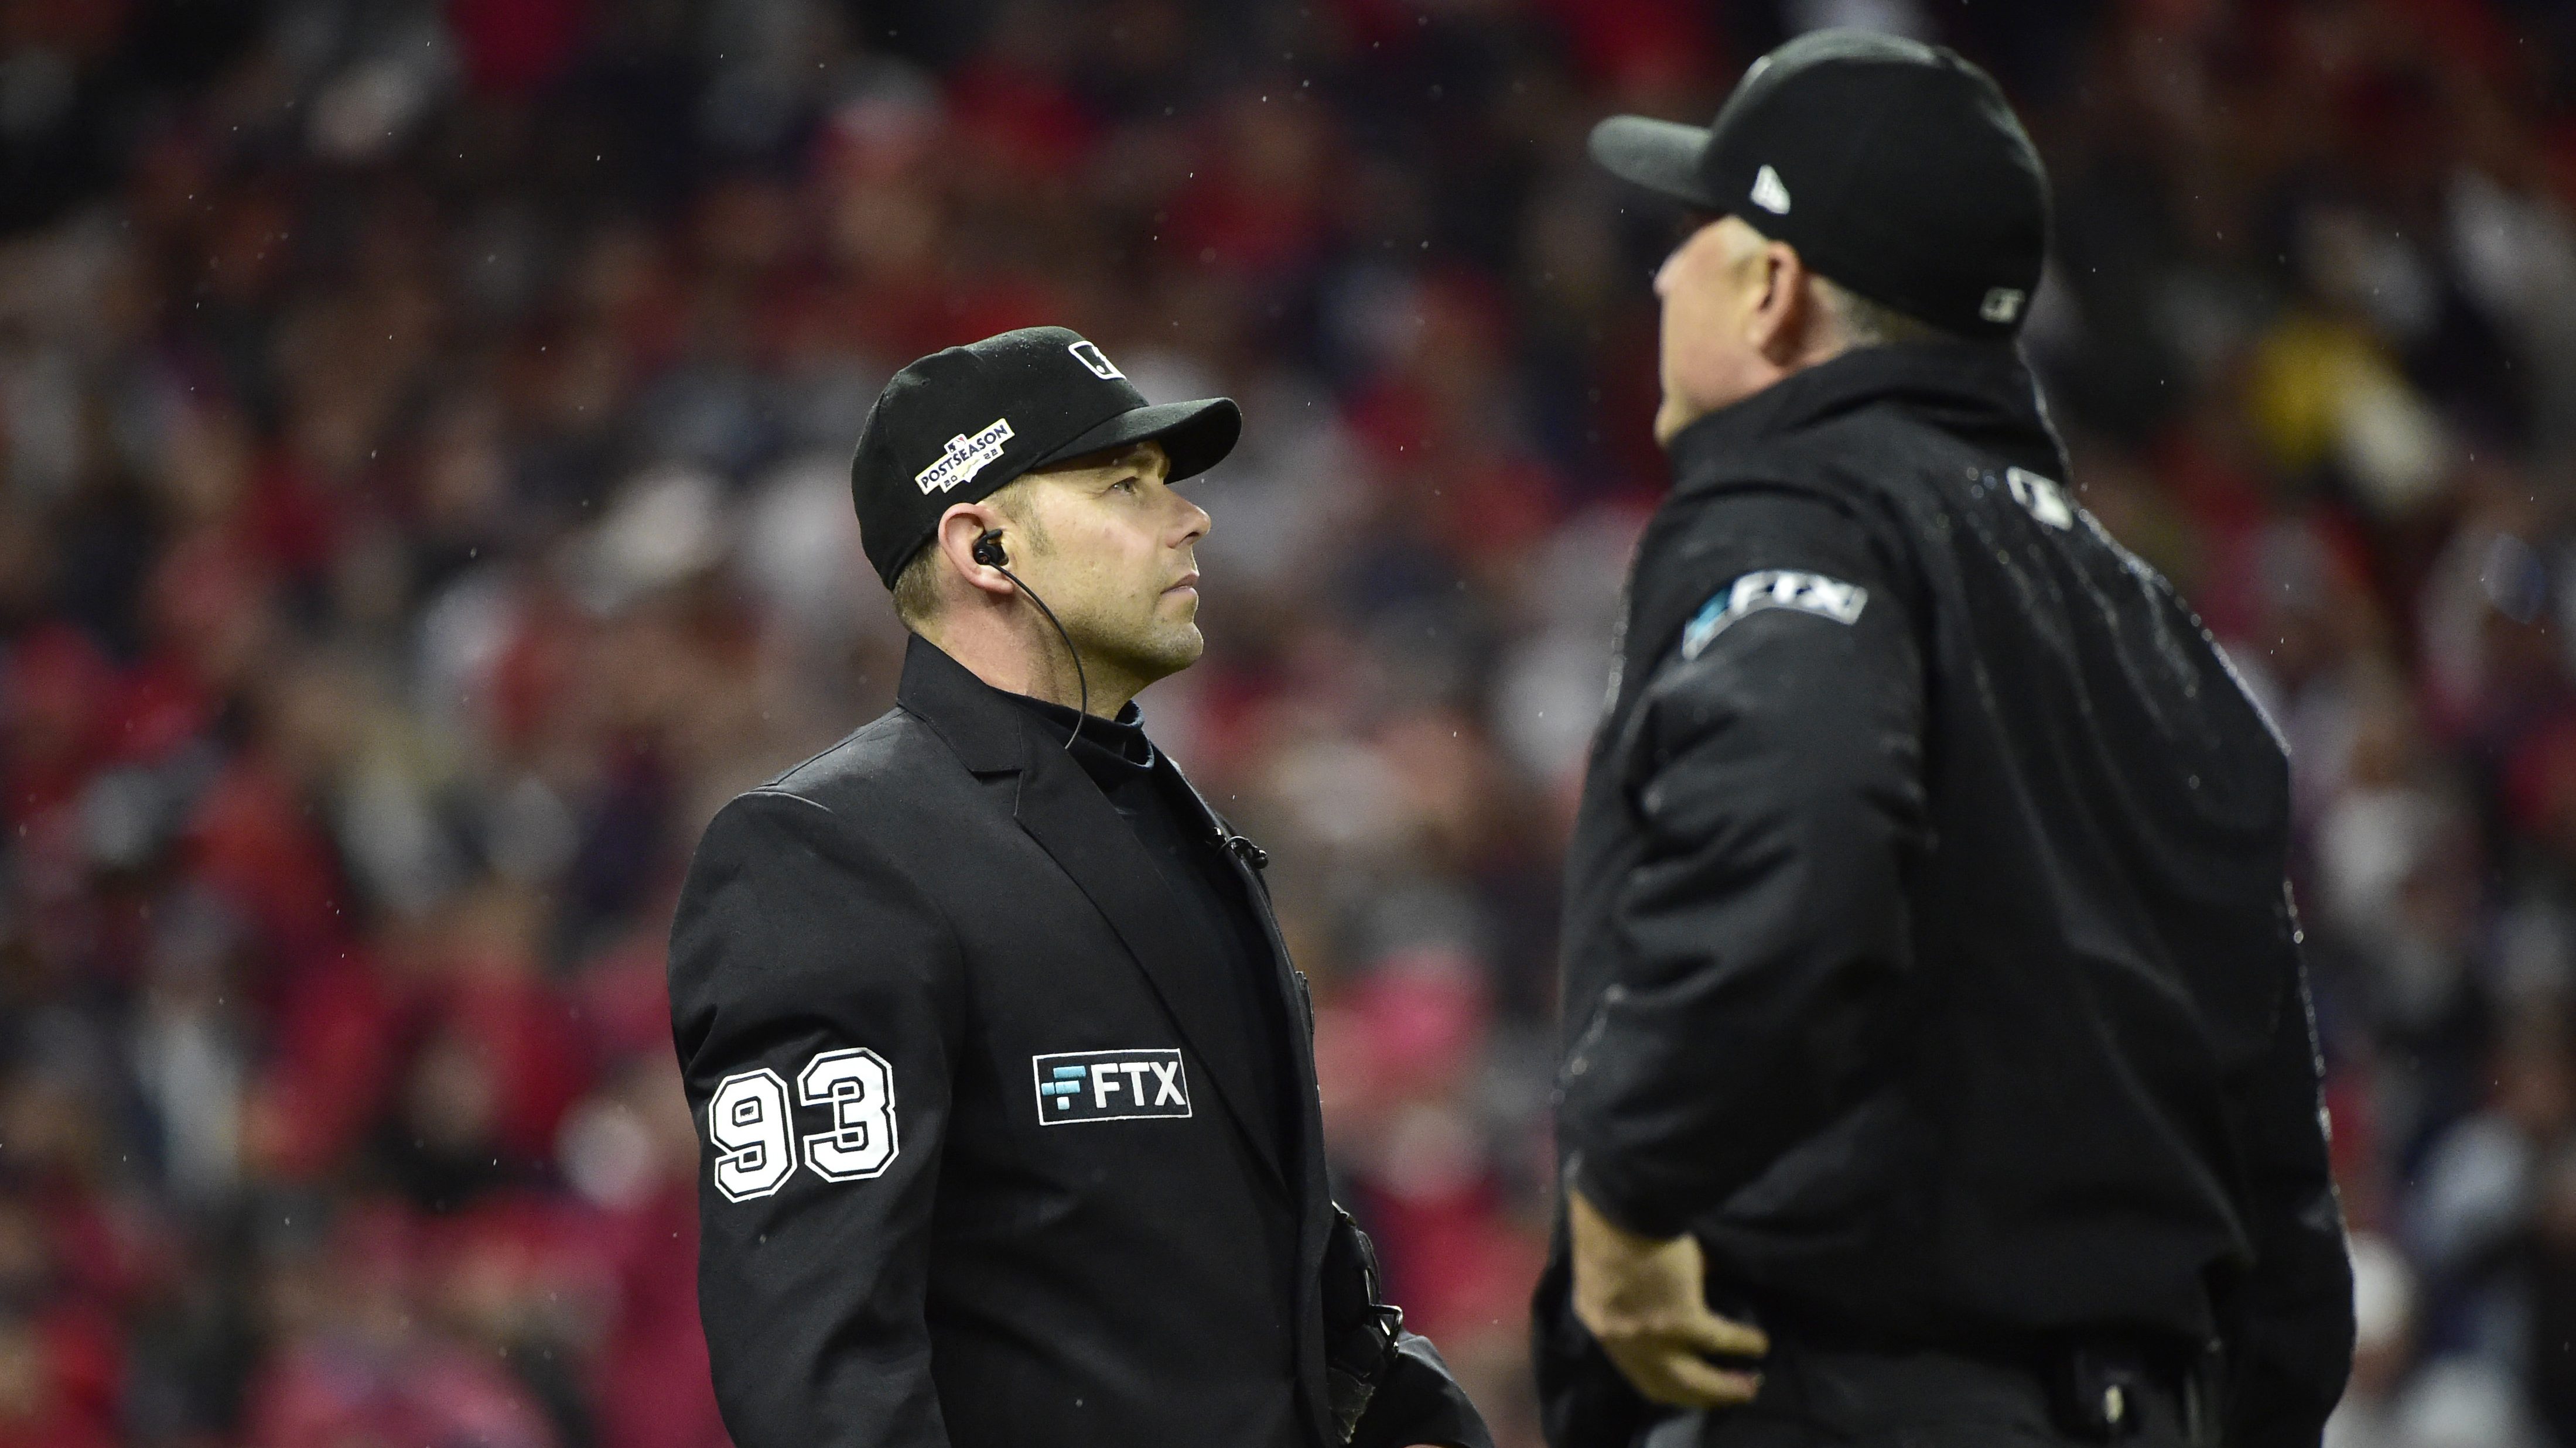 World Series Ump Crew Youngest in Years, Nod to K-zone Tech